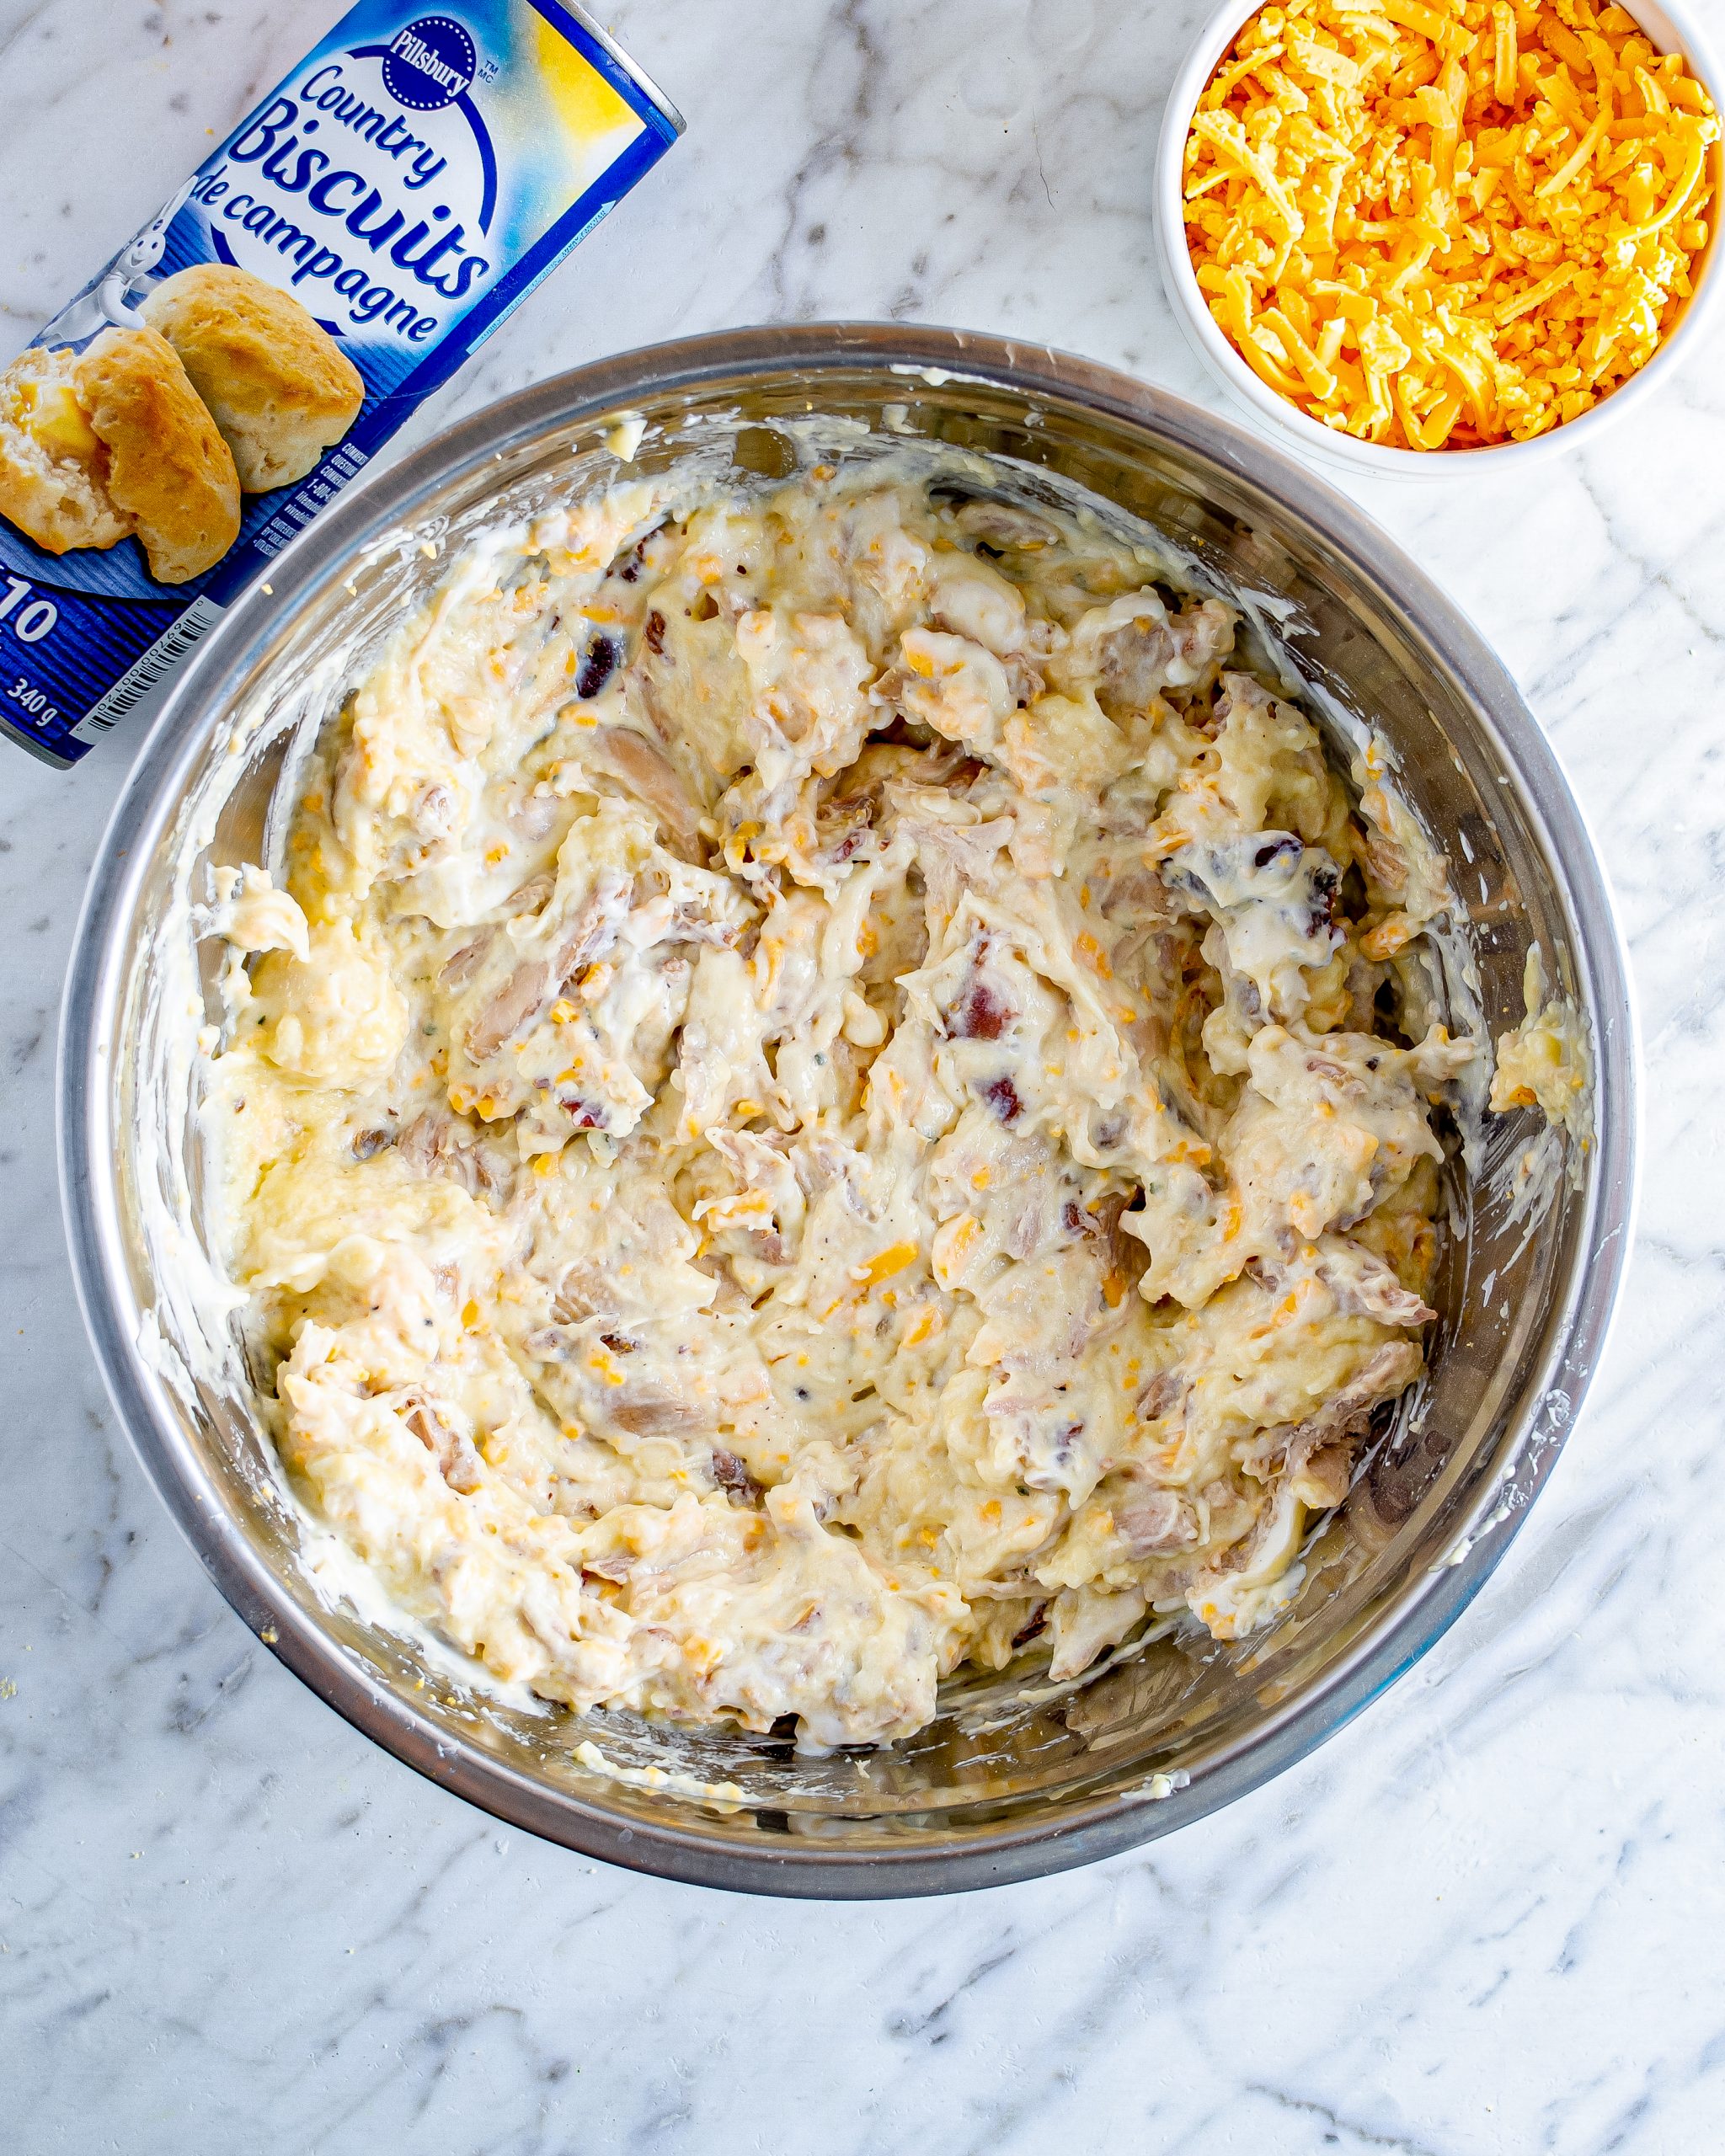 In a bowl, mix together the sour cream, soups, chicken, Ranch seasoning, 1 cup of cheddar cheese, and bacon.